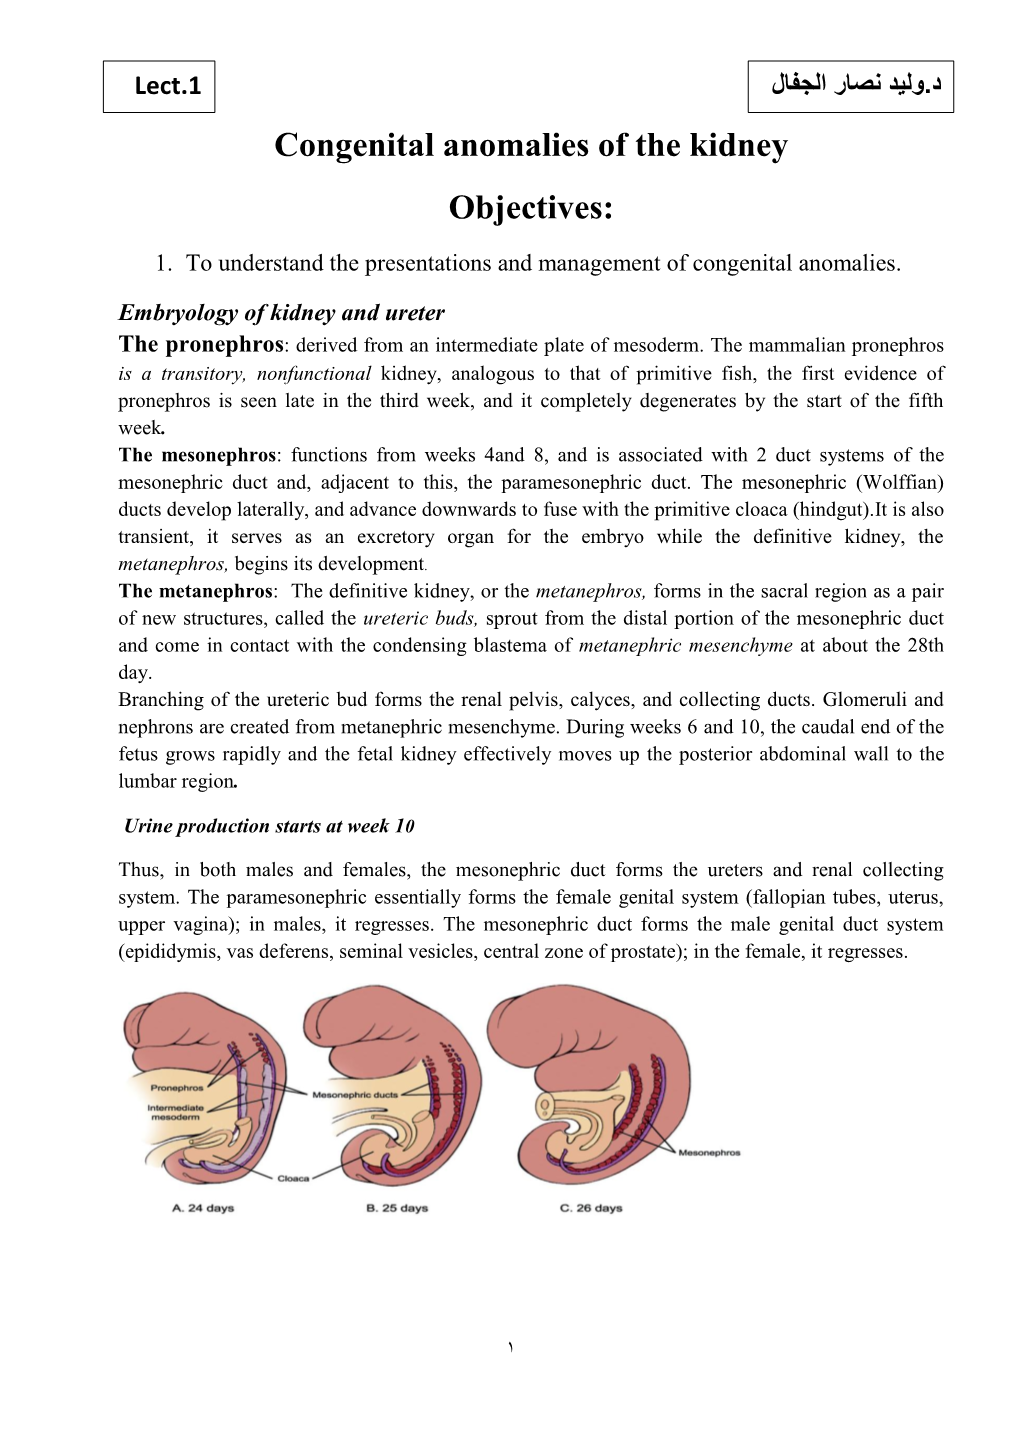 Congenital Anomalies of the Kidney Objectives